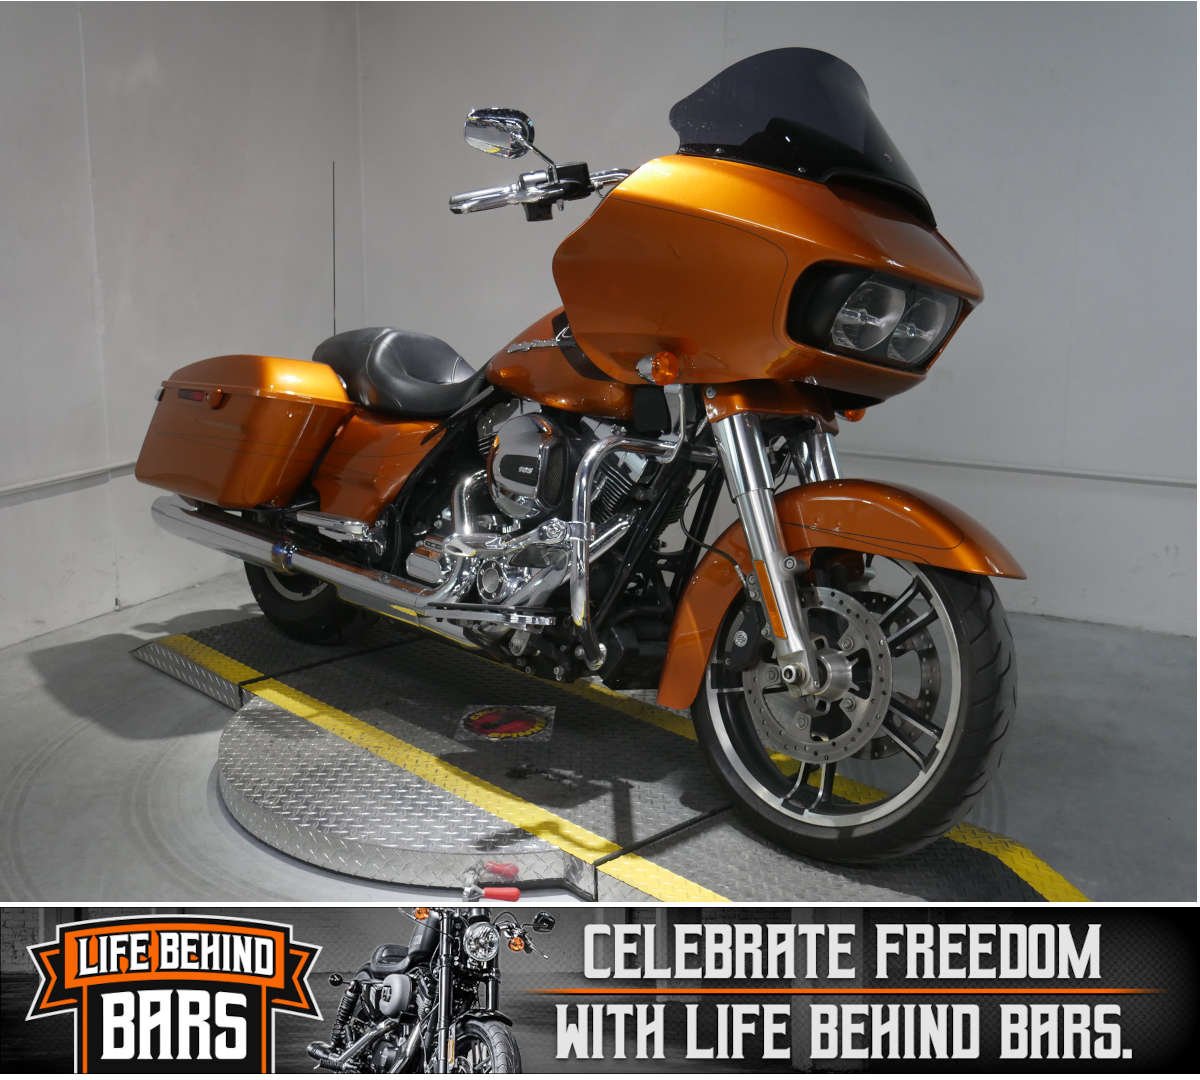 Used 2015 Harley Davidson Road Glide Special Amber Whiskey Motorcycles In Coralville Ia 602378